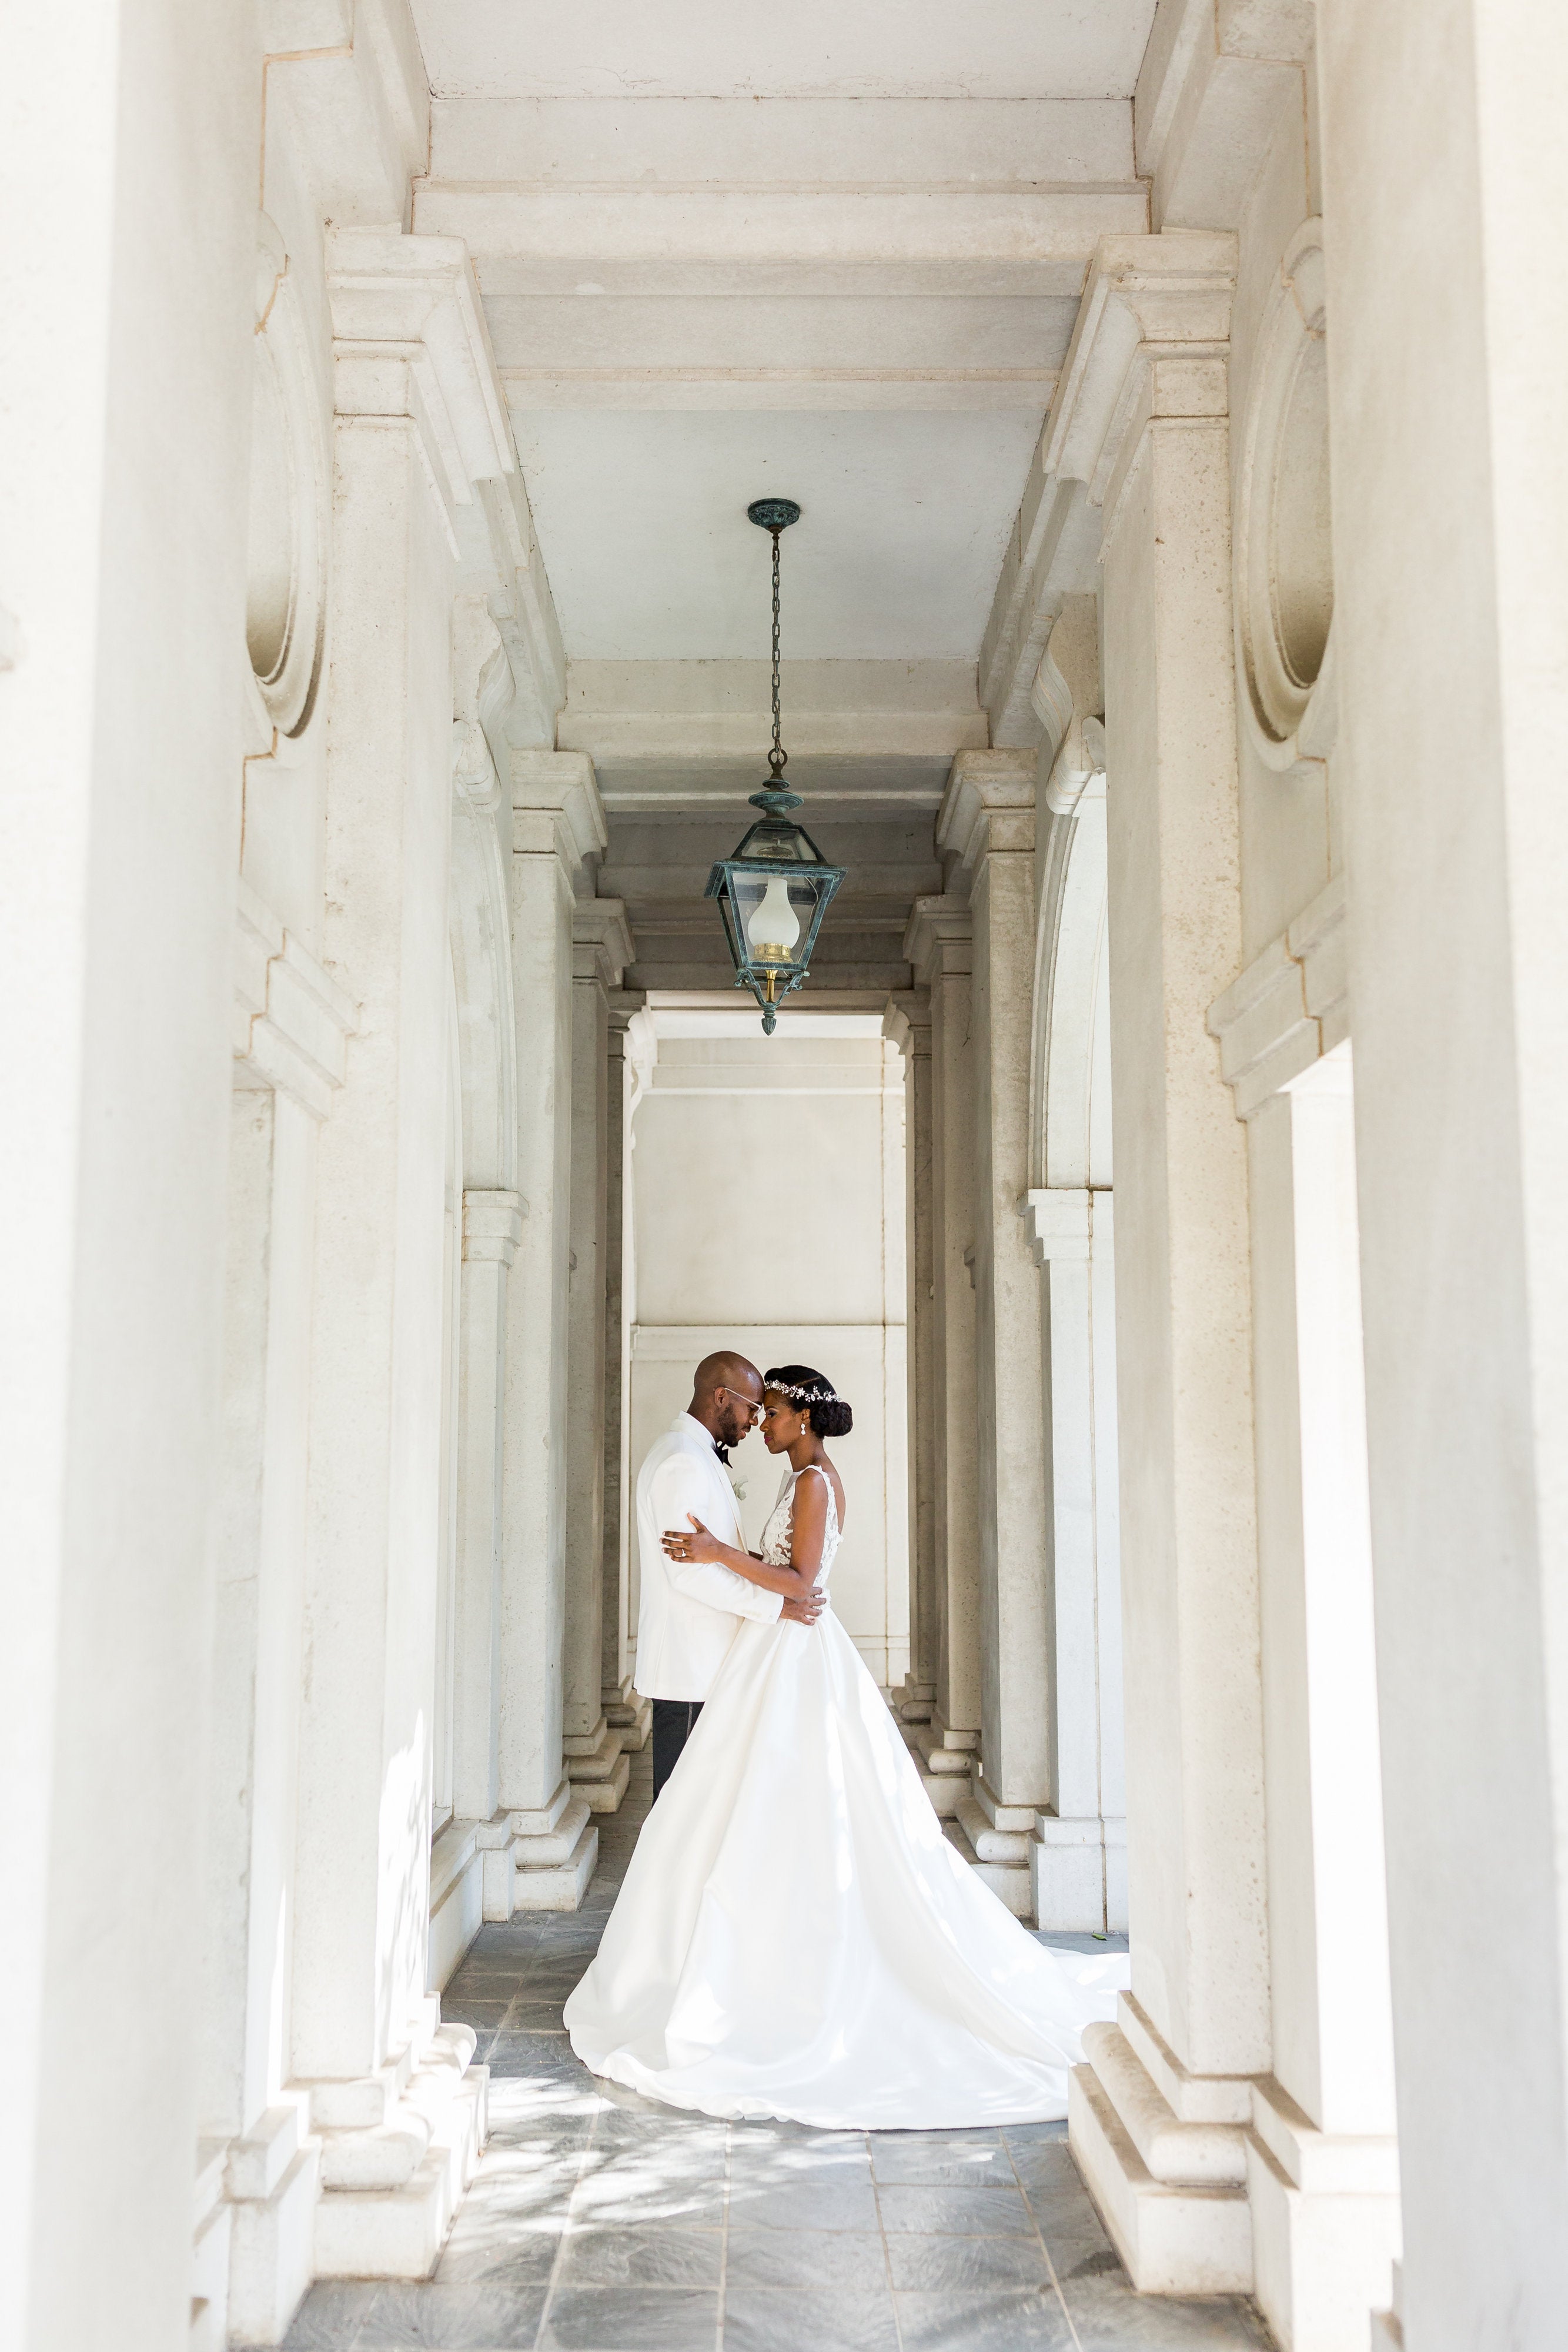 Bridal Bliss: We Can't Stop Looking At Shaun And Ikeda's Gorgeous Garden Wedding
